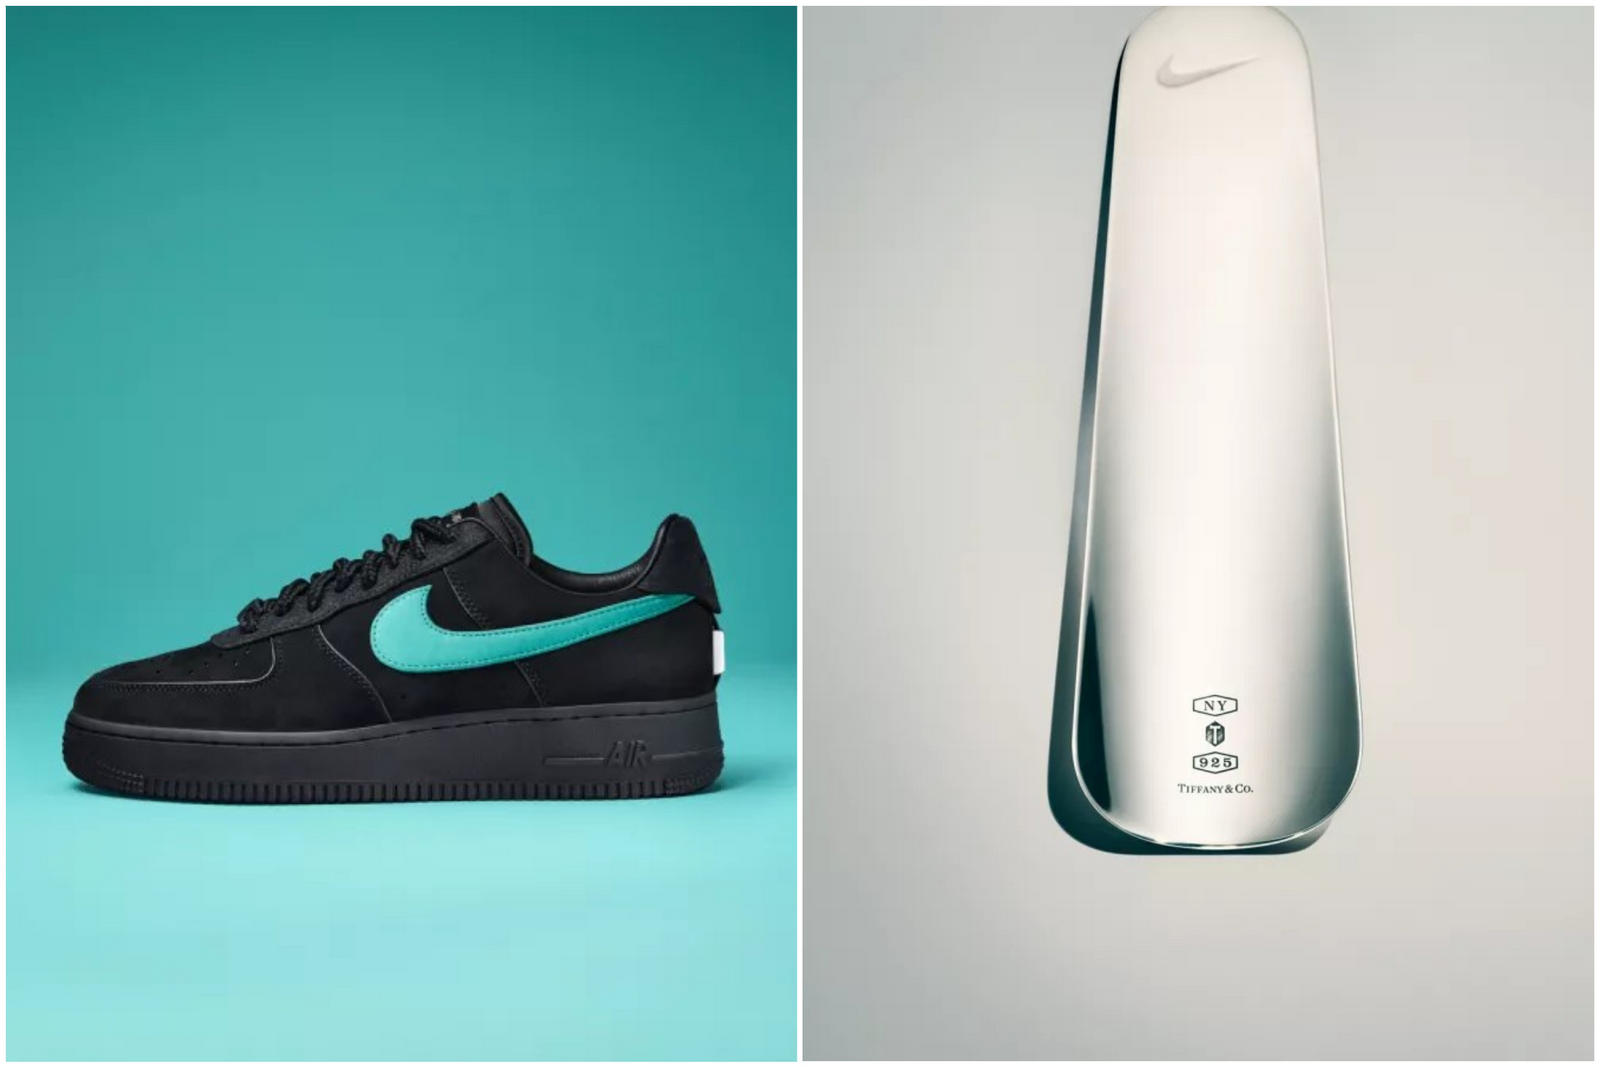 Discover the Unseen Beauty of Tiffany & Co and Nike's Collaboration - Shop Now!